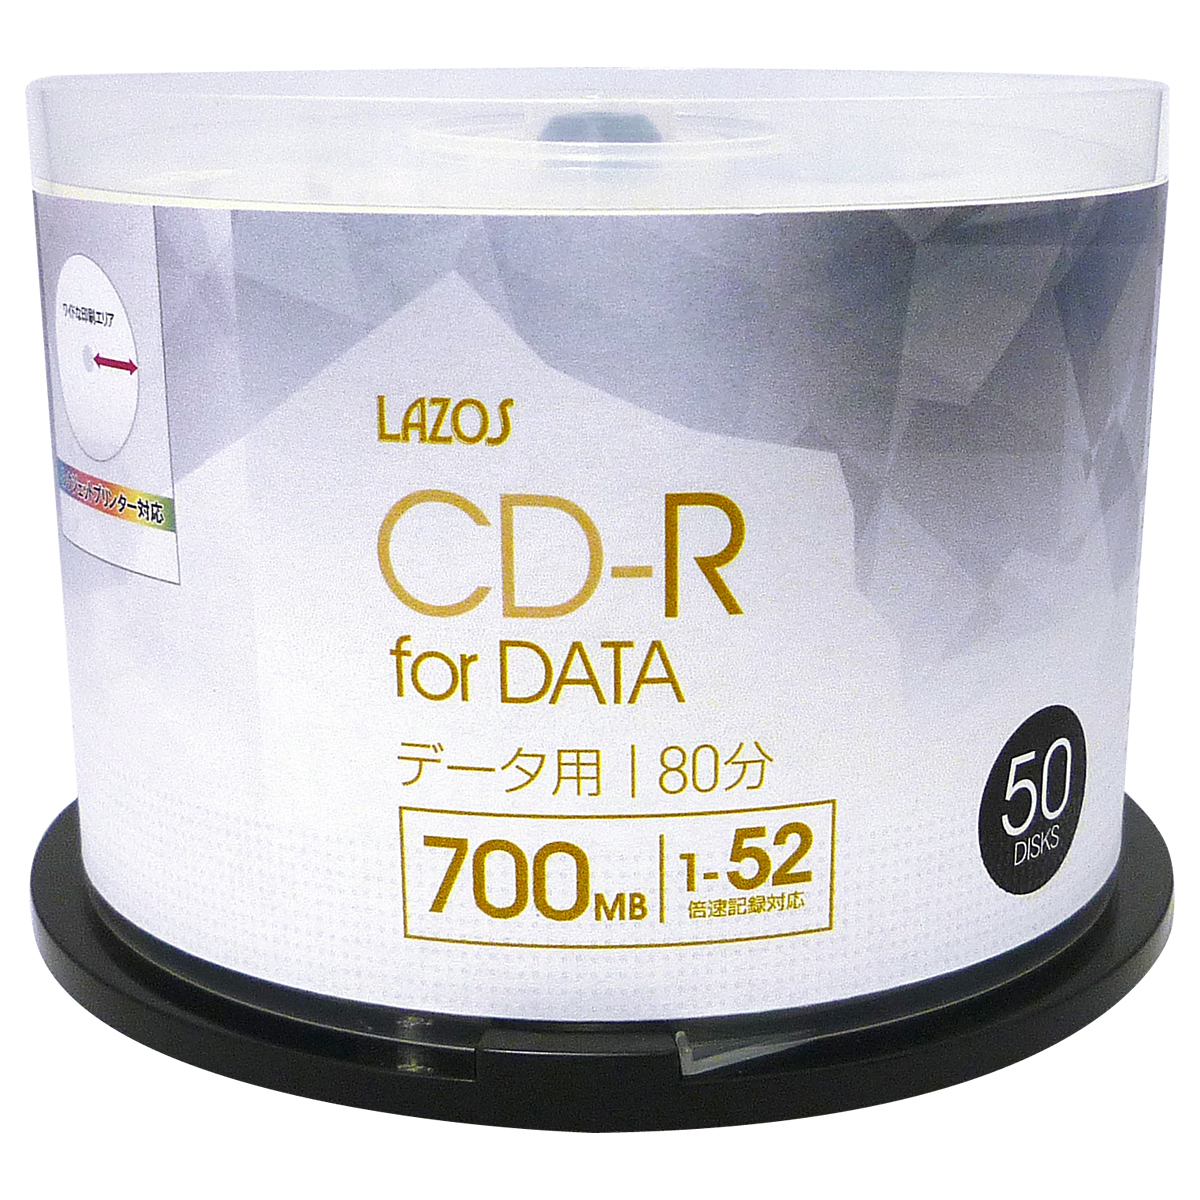  including in a package possibility CD-R 50 sheets set spindle case go in 700MB for DATA 1-52 speed correspondence white wide printing correspondence L-CD50P/2587 Lazosx1 piece 